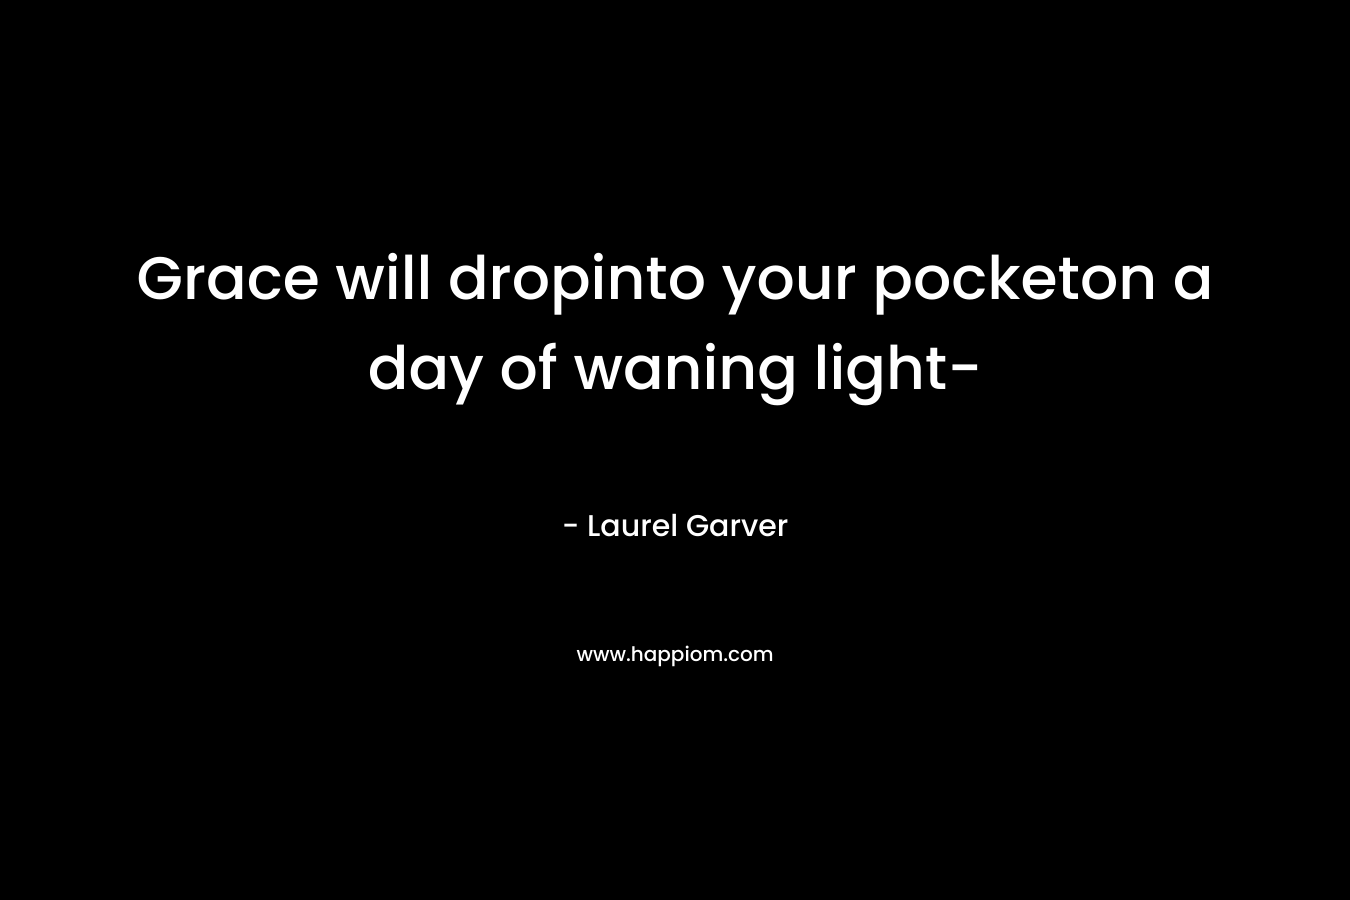 Grace will dropinto your pocketon a day of waning light-